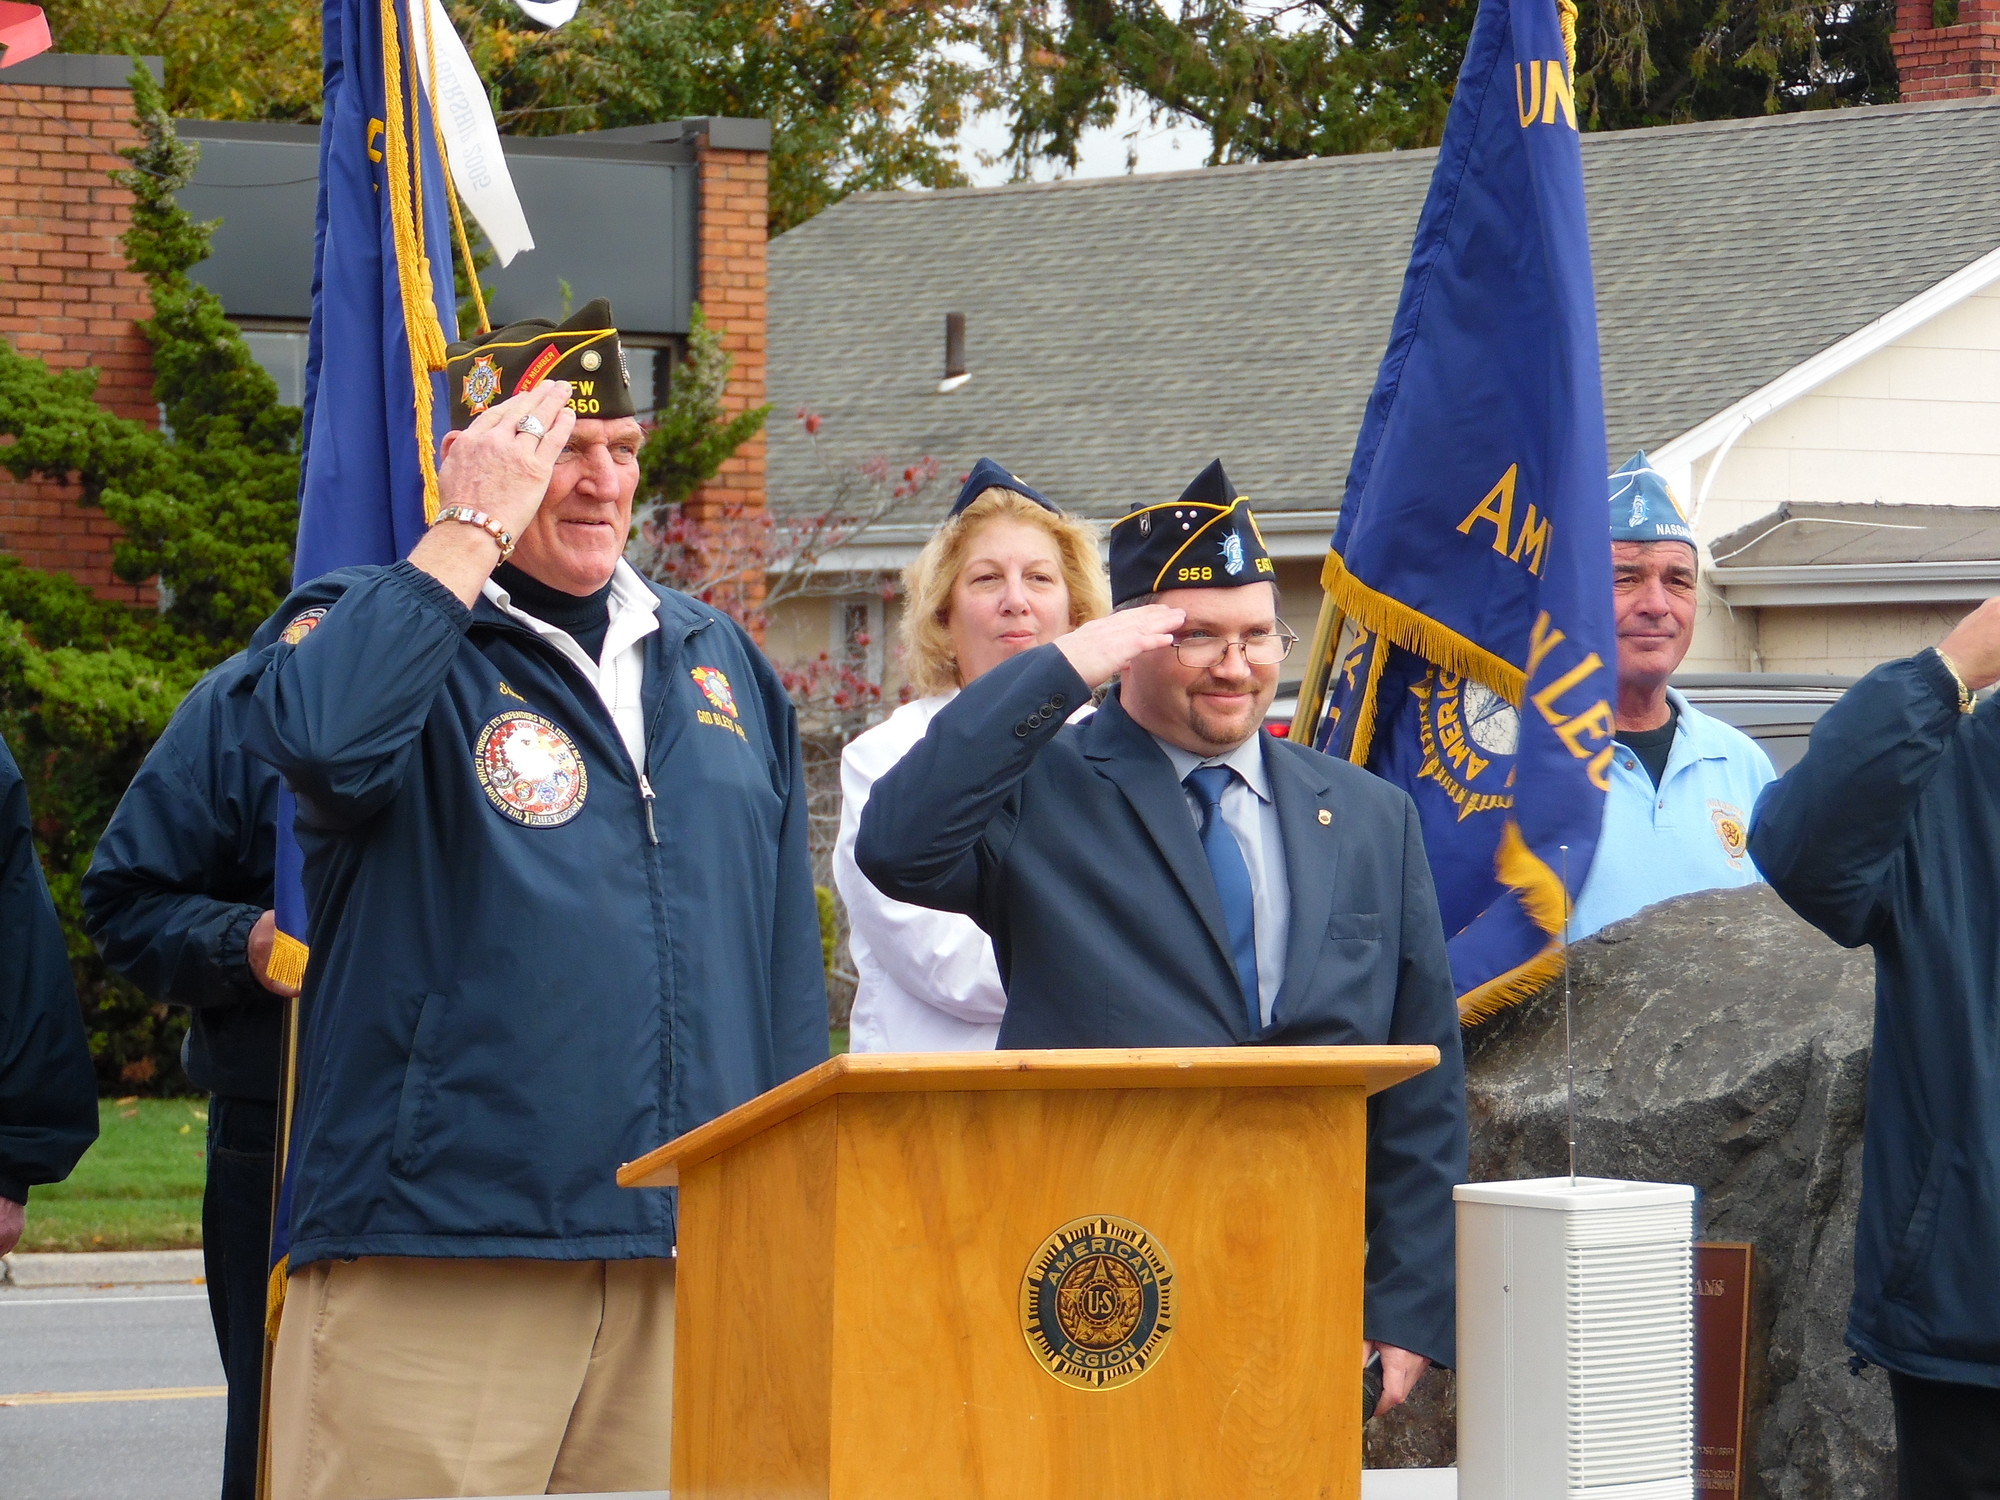 VFW Commander Steve Owen, left, and American Legion Commander Dean Fenton saluted at the end of the service at Veterans Triangle in East Rockaway.